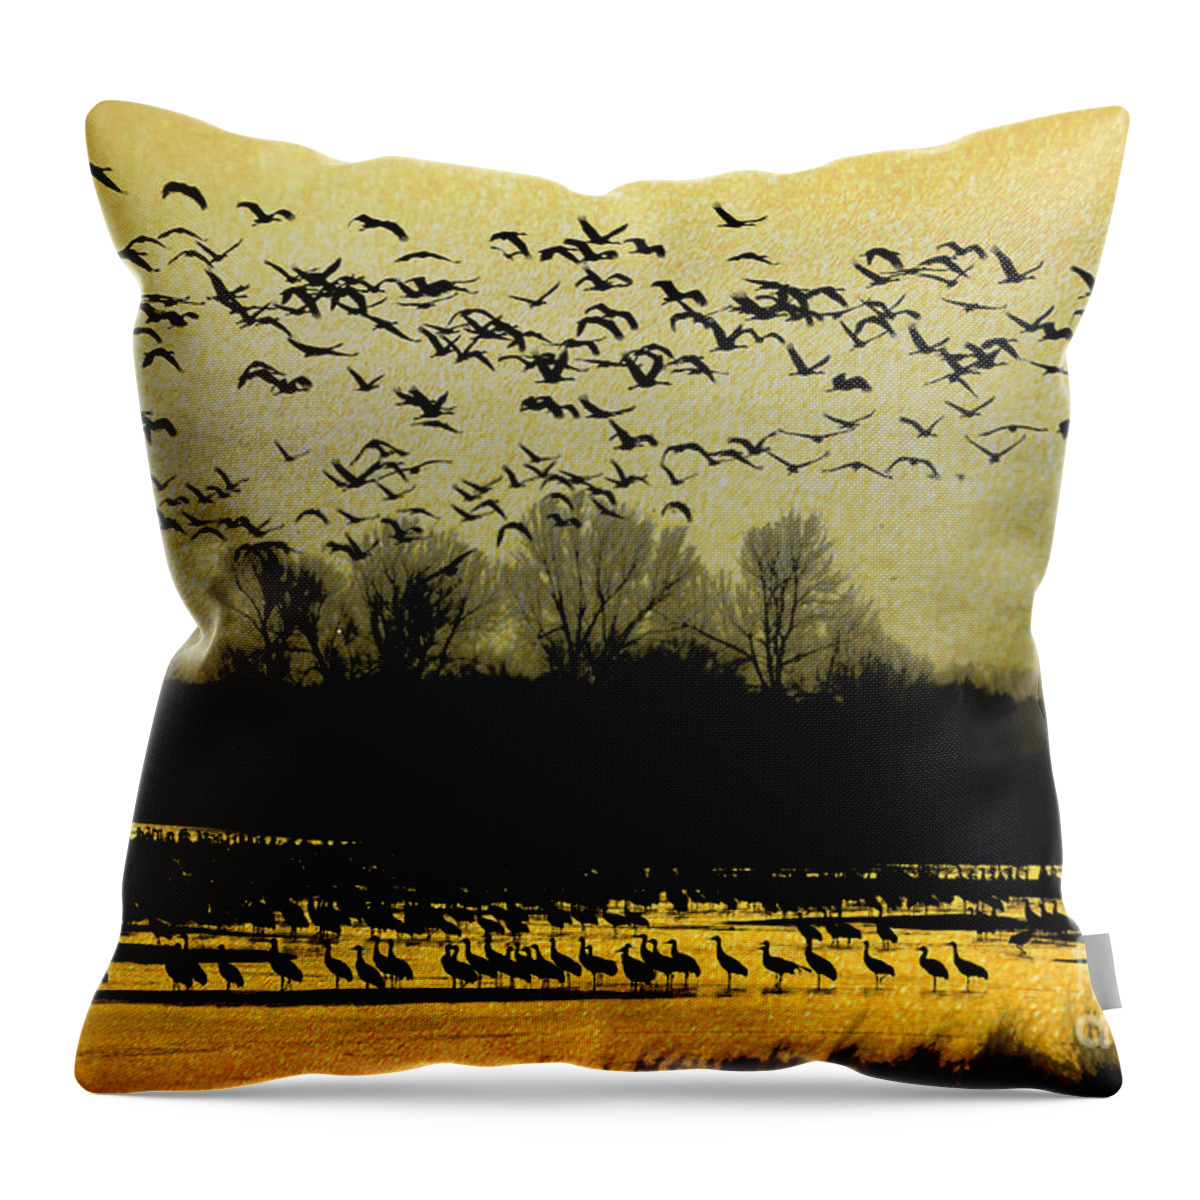 Sandhill Cranes Throw Pillow featuring the photograph On Golden Pond by Elizabeth Winter